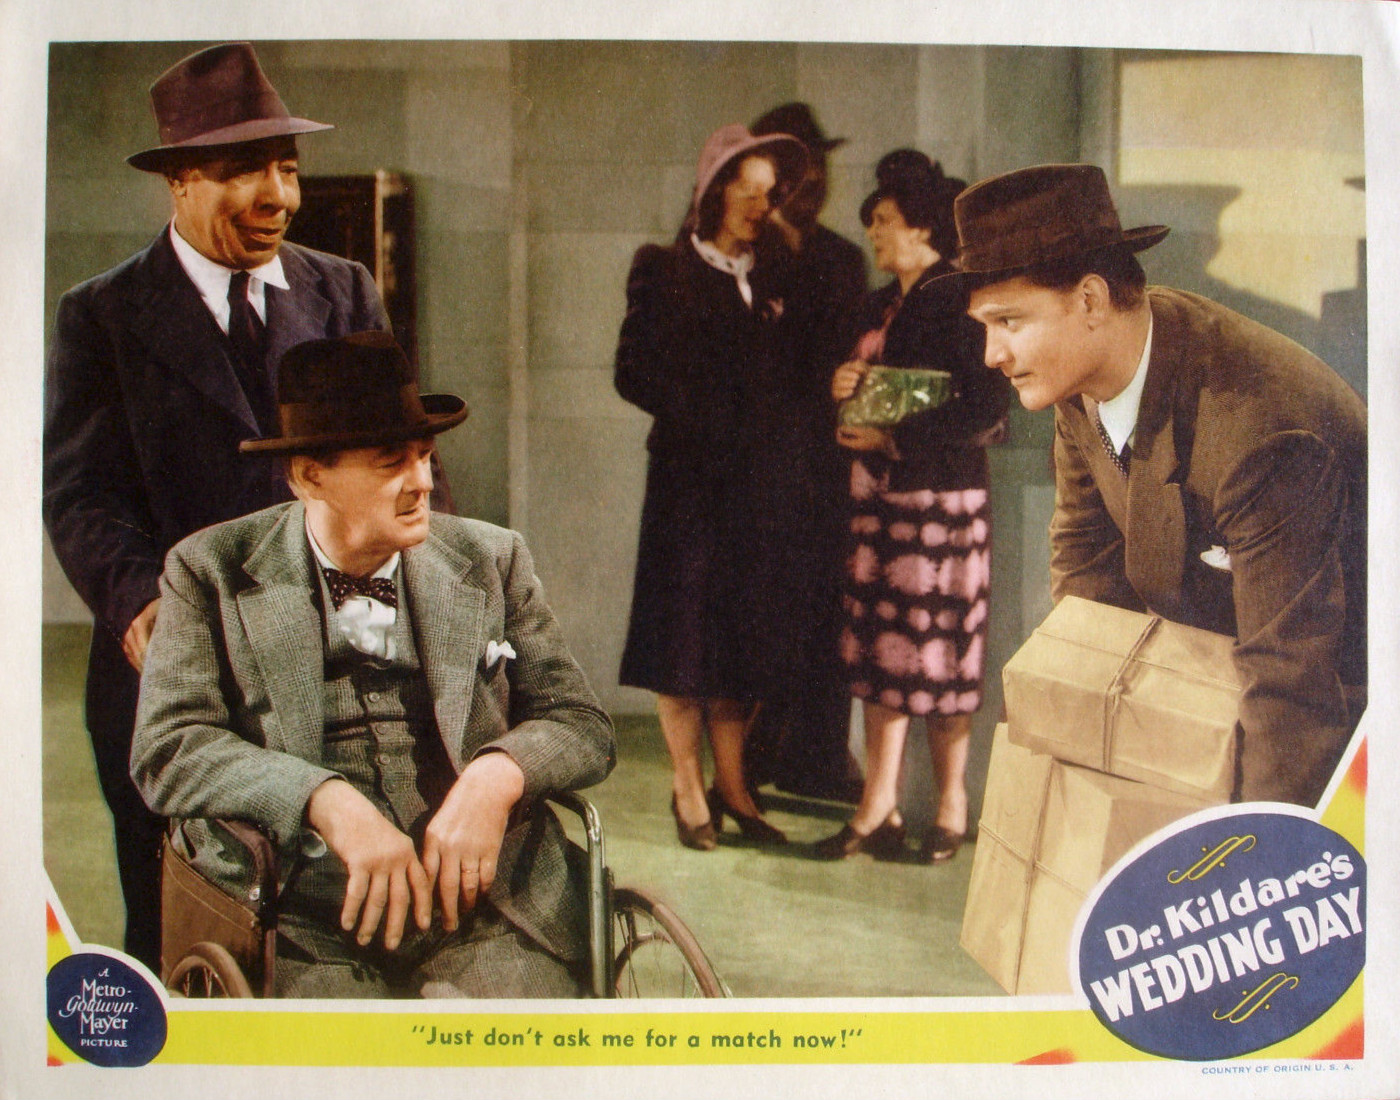 Dr. Kildare's Wedding Day, starring Lew Ayres, Laraine Day, Lionel Barrymore, Red Skelton